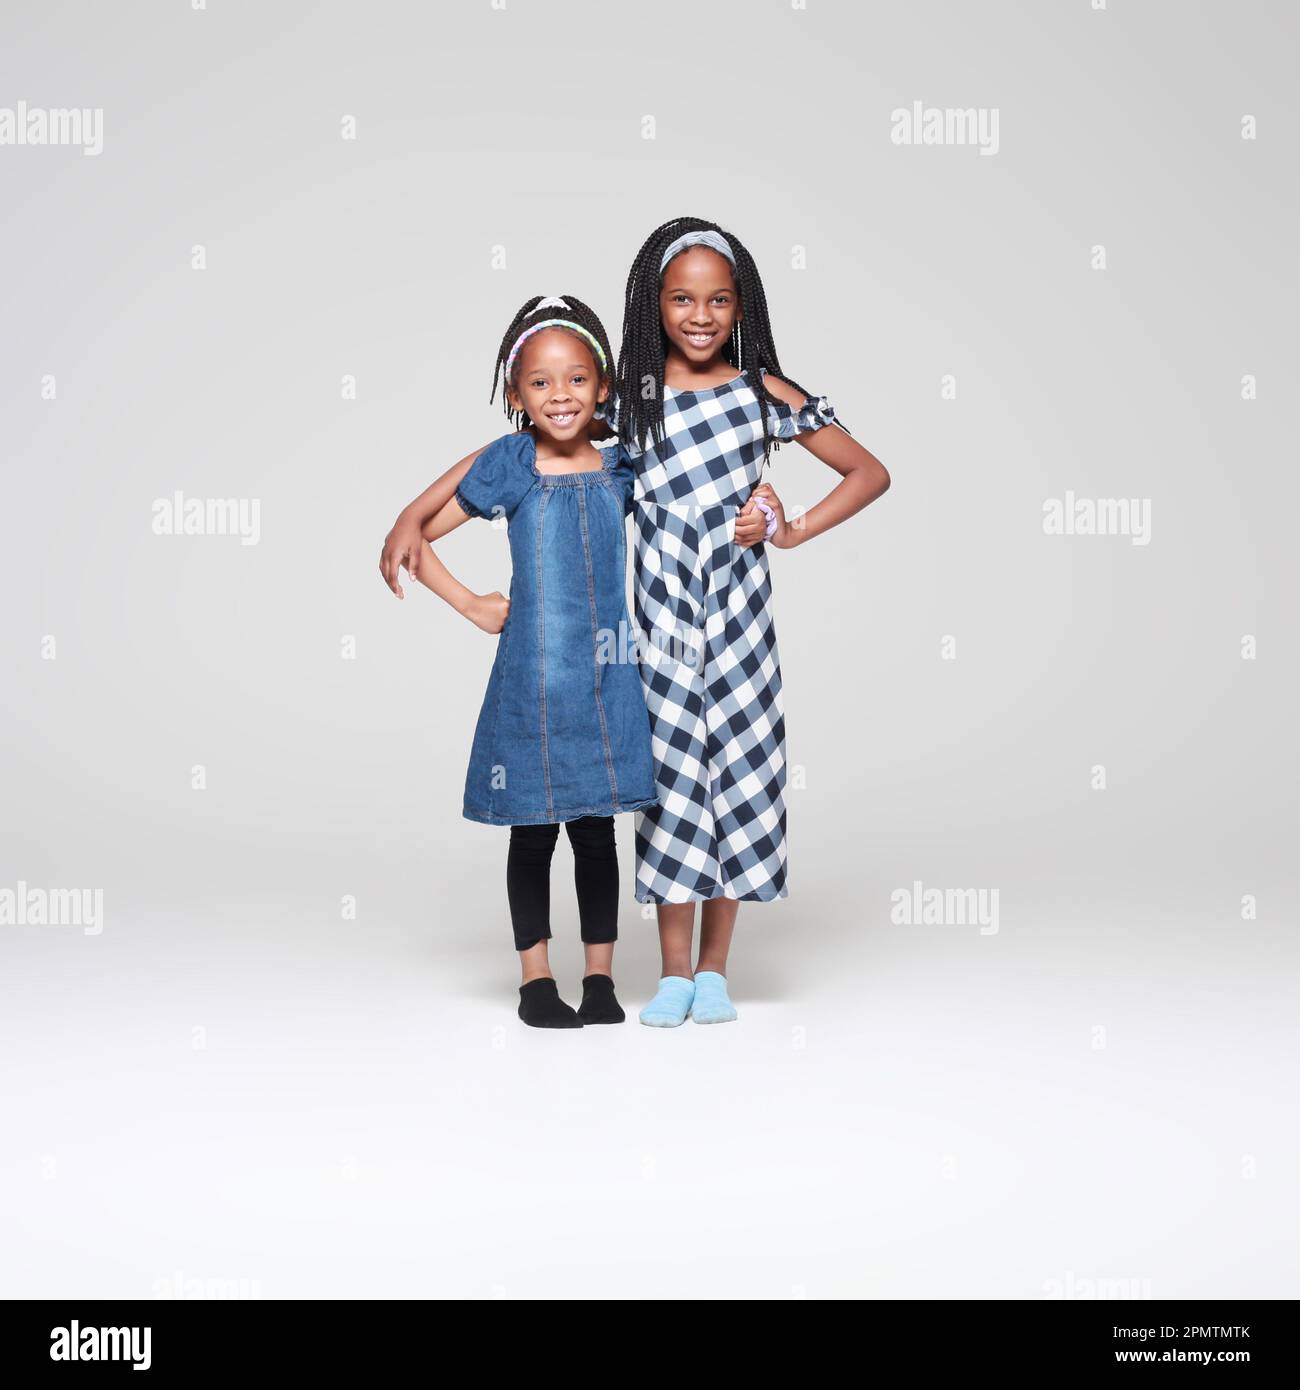 Two beautiful African-American girls with intricate braids pose confidently in a minimalist studio setting, embracing their culture and sisterhood. Stock Photo